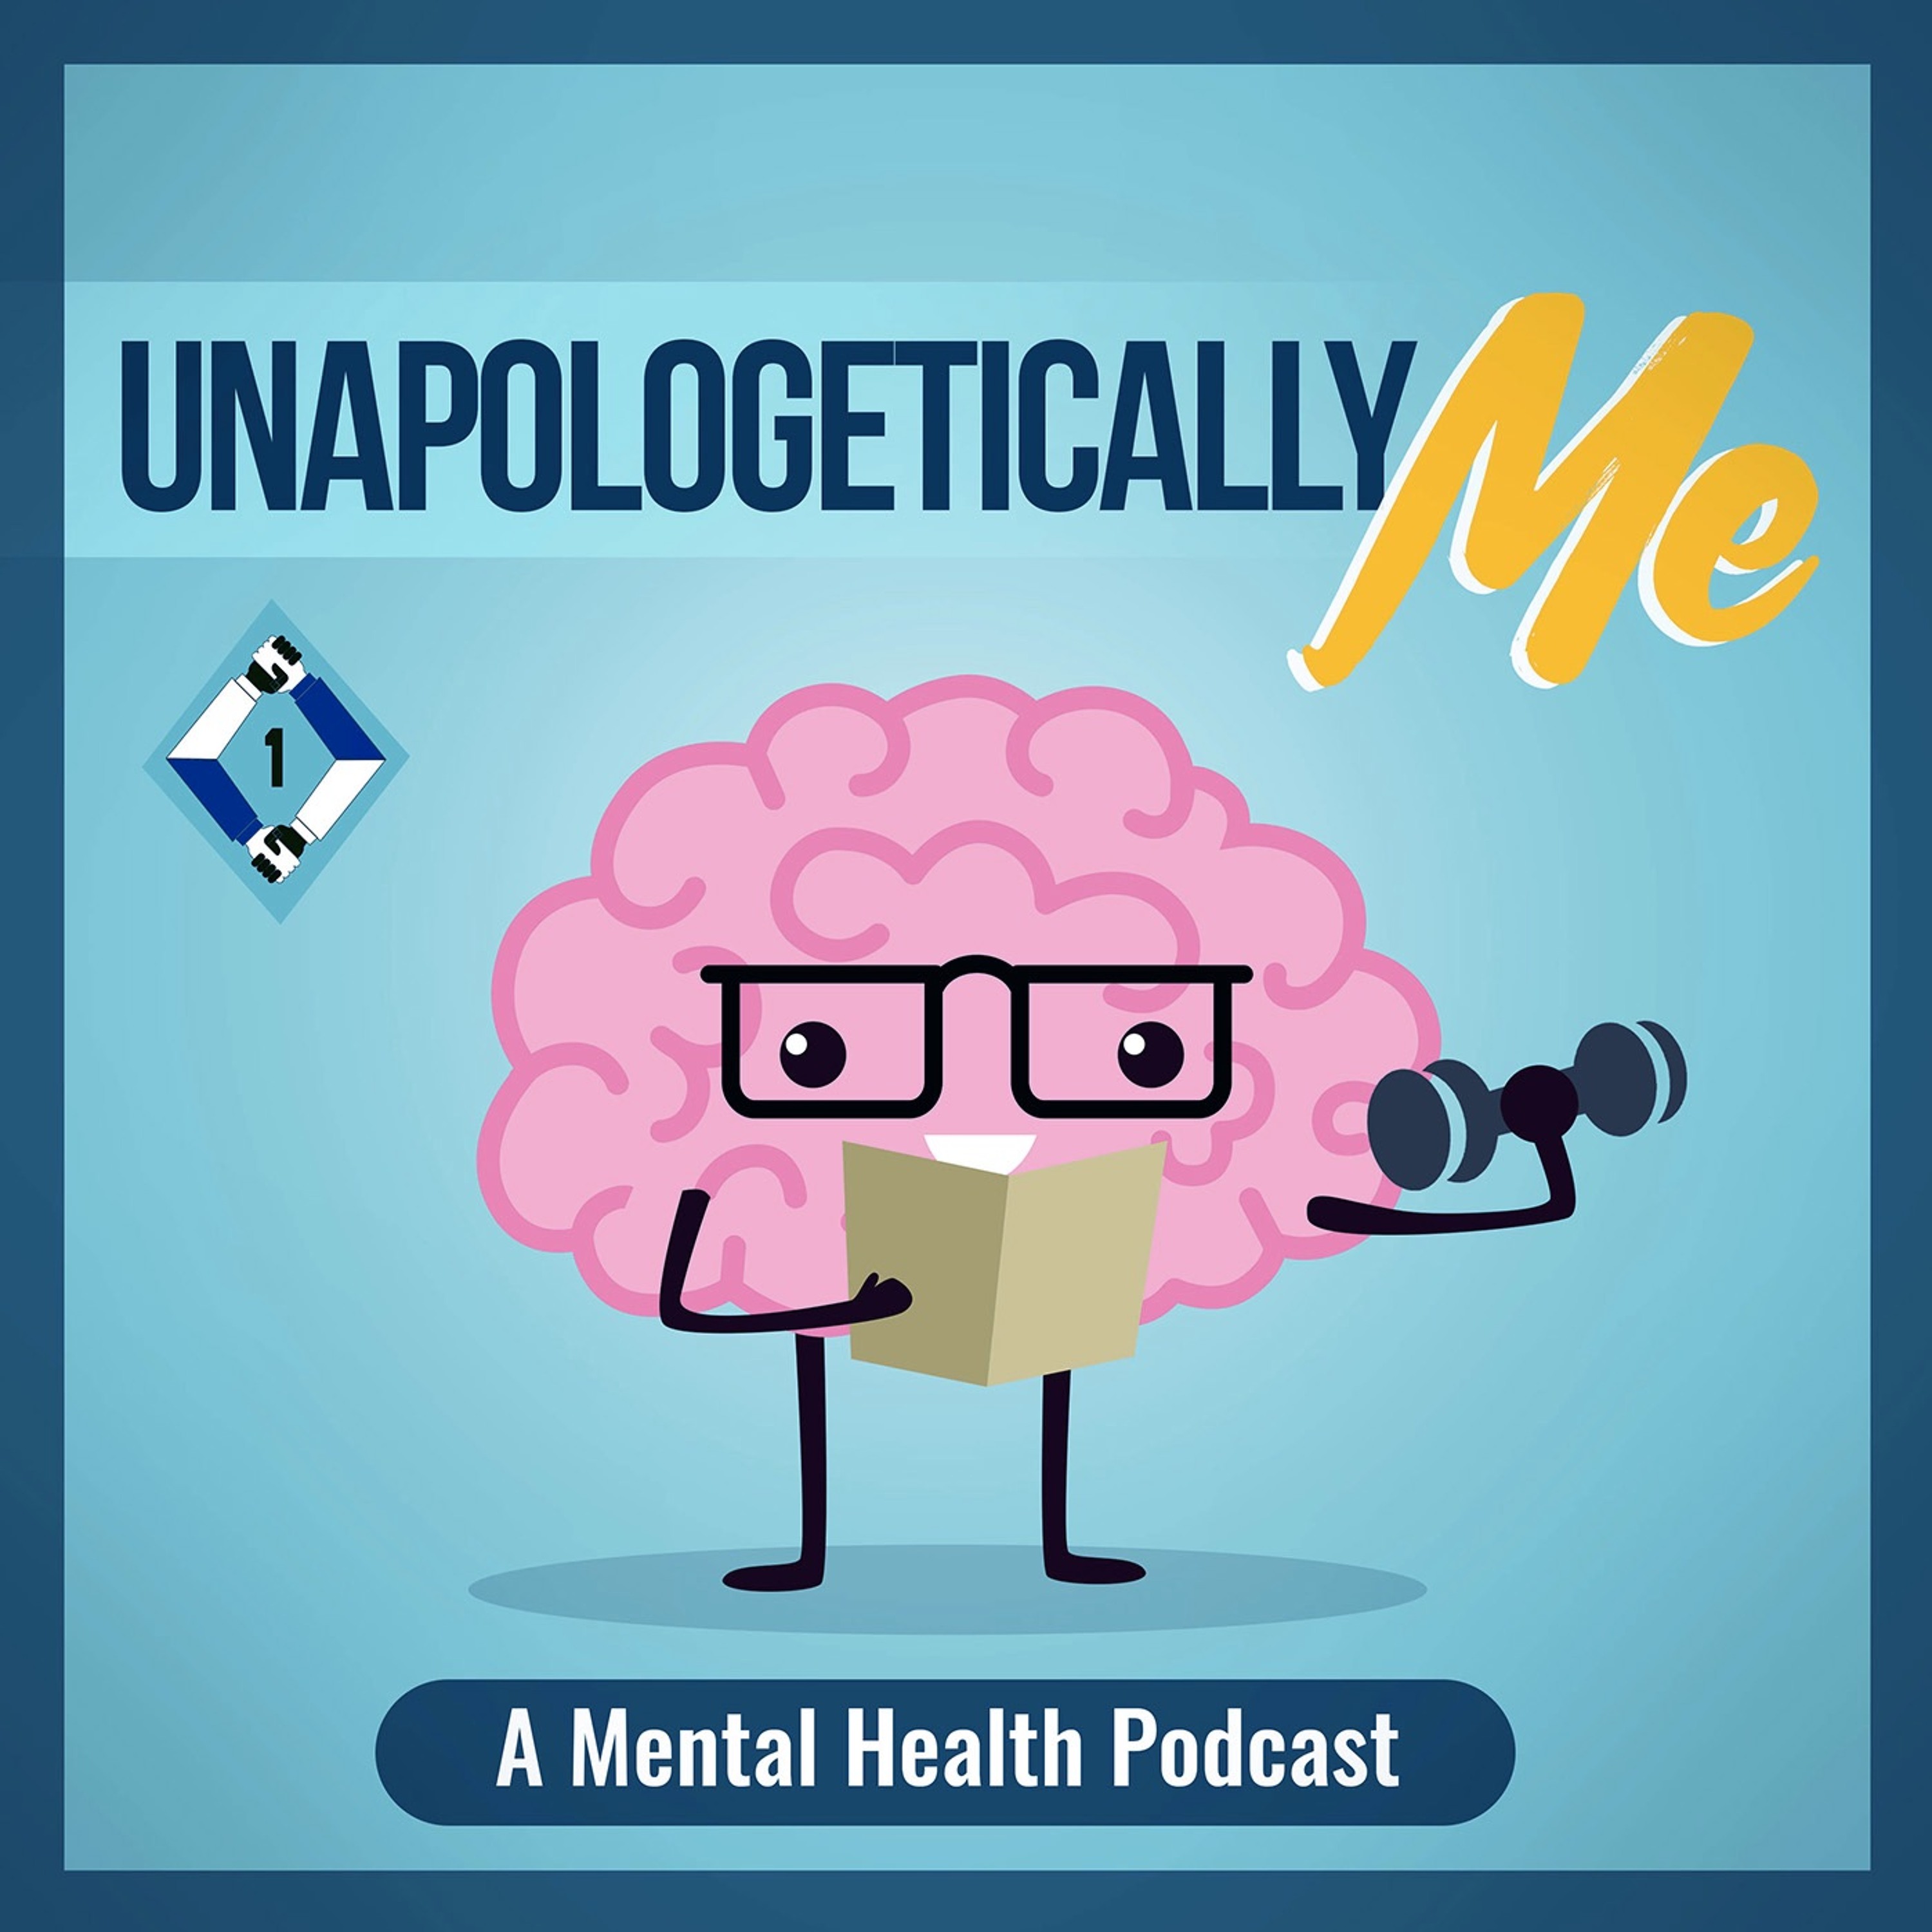 Unapologetically Me: A Mental Health Podcast - Relentlessly Driven